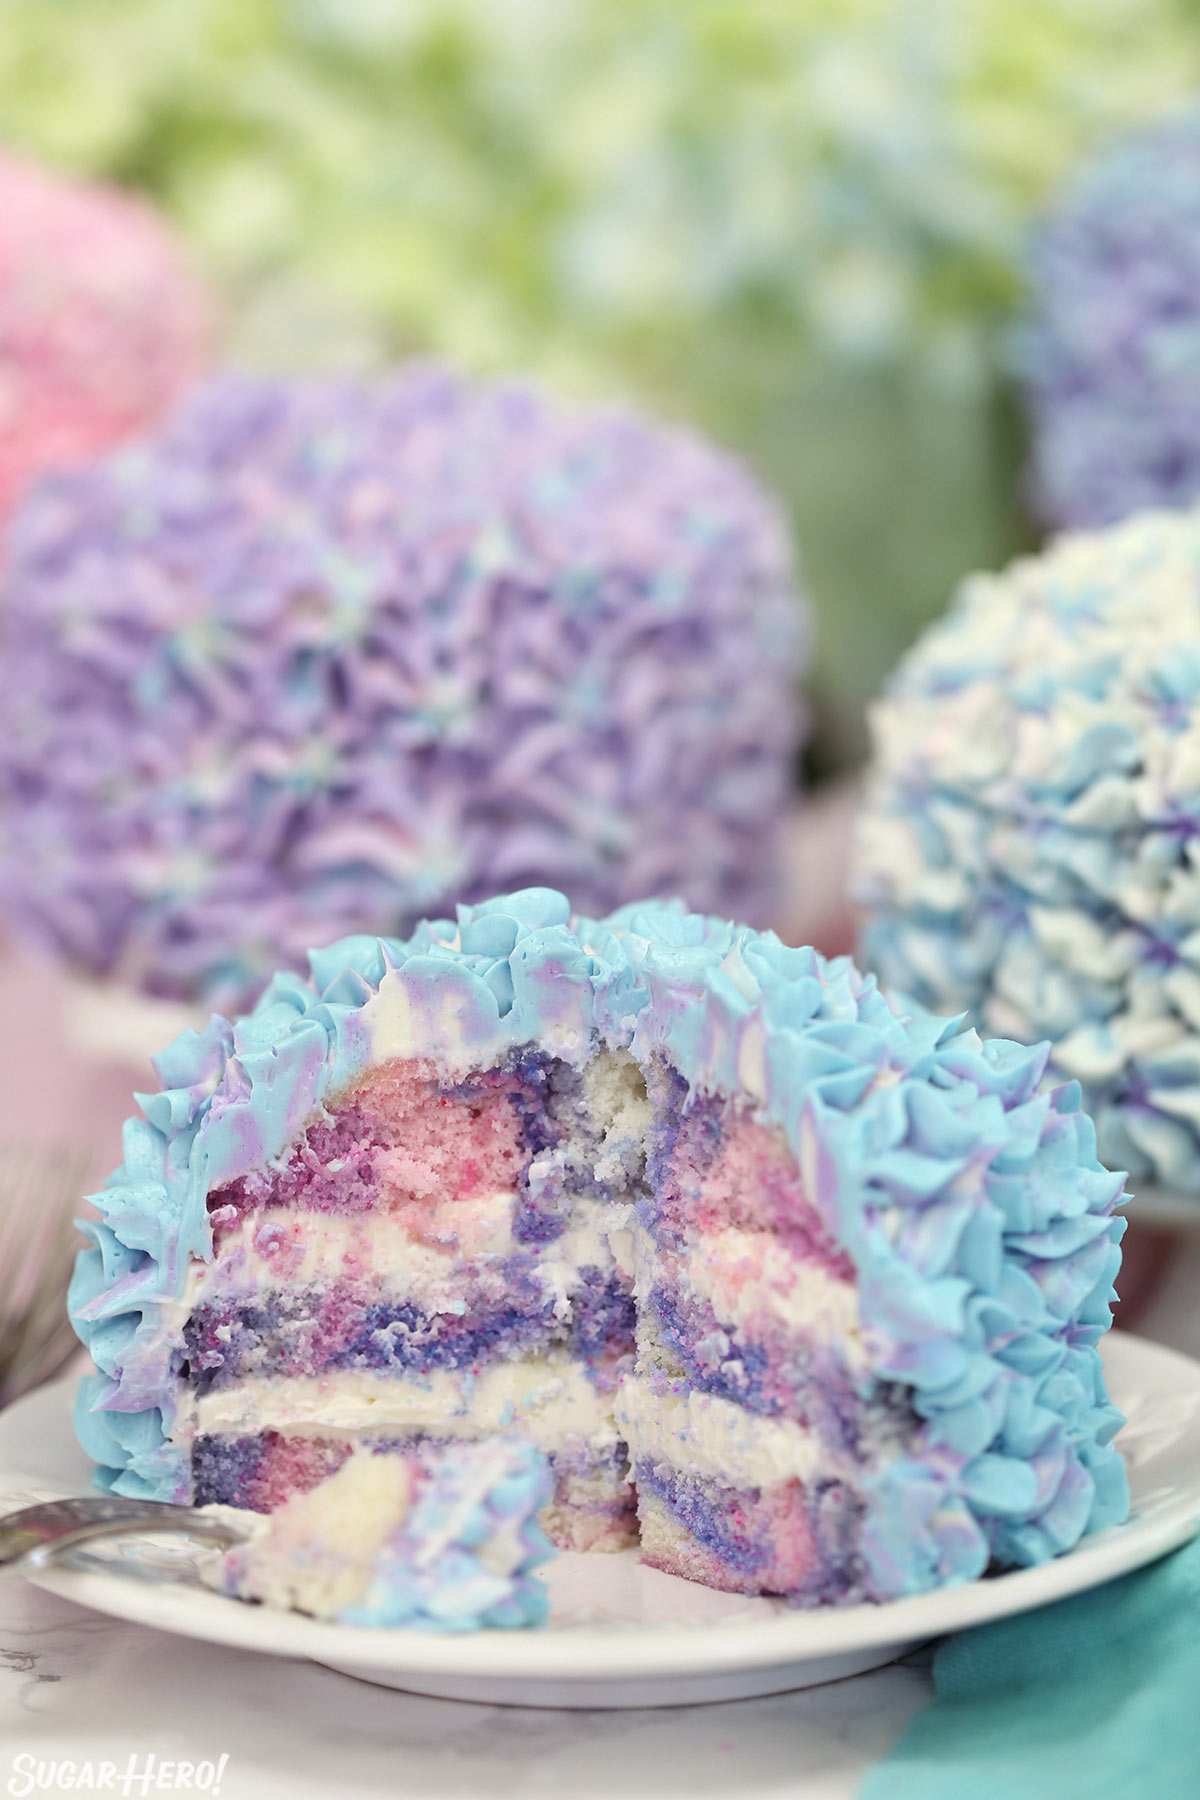 Hydrangea Cakes - A cake with bites take out showing the colorful inside. | From SugarHero.com